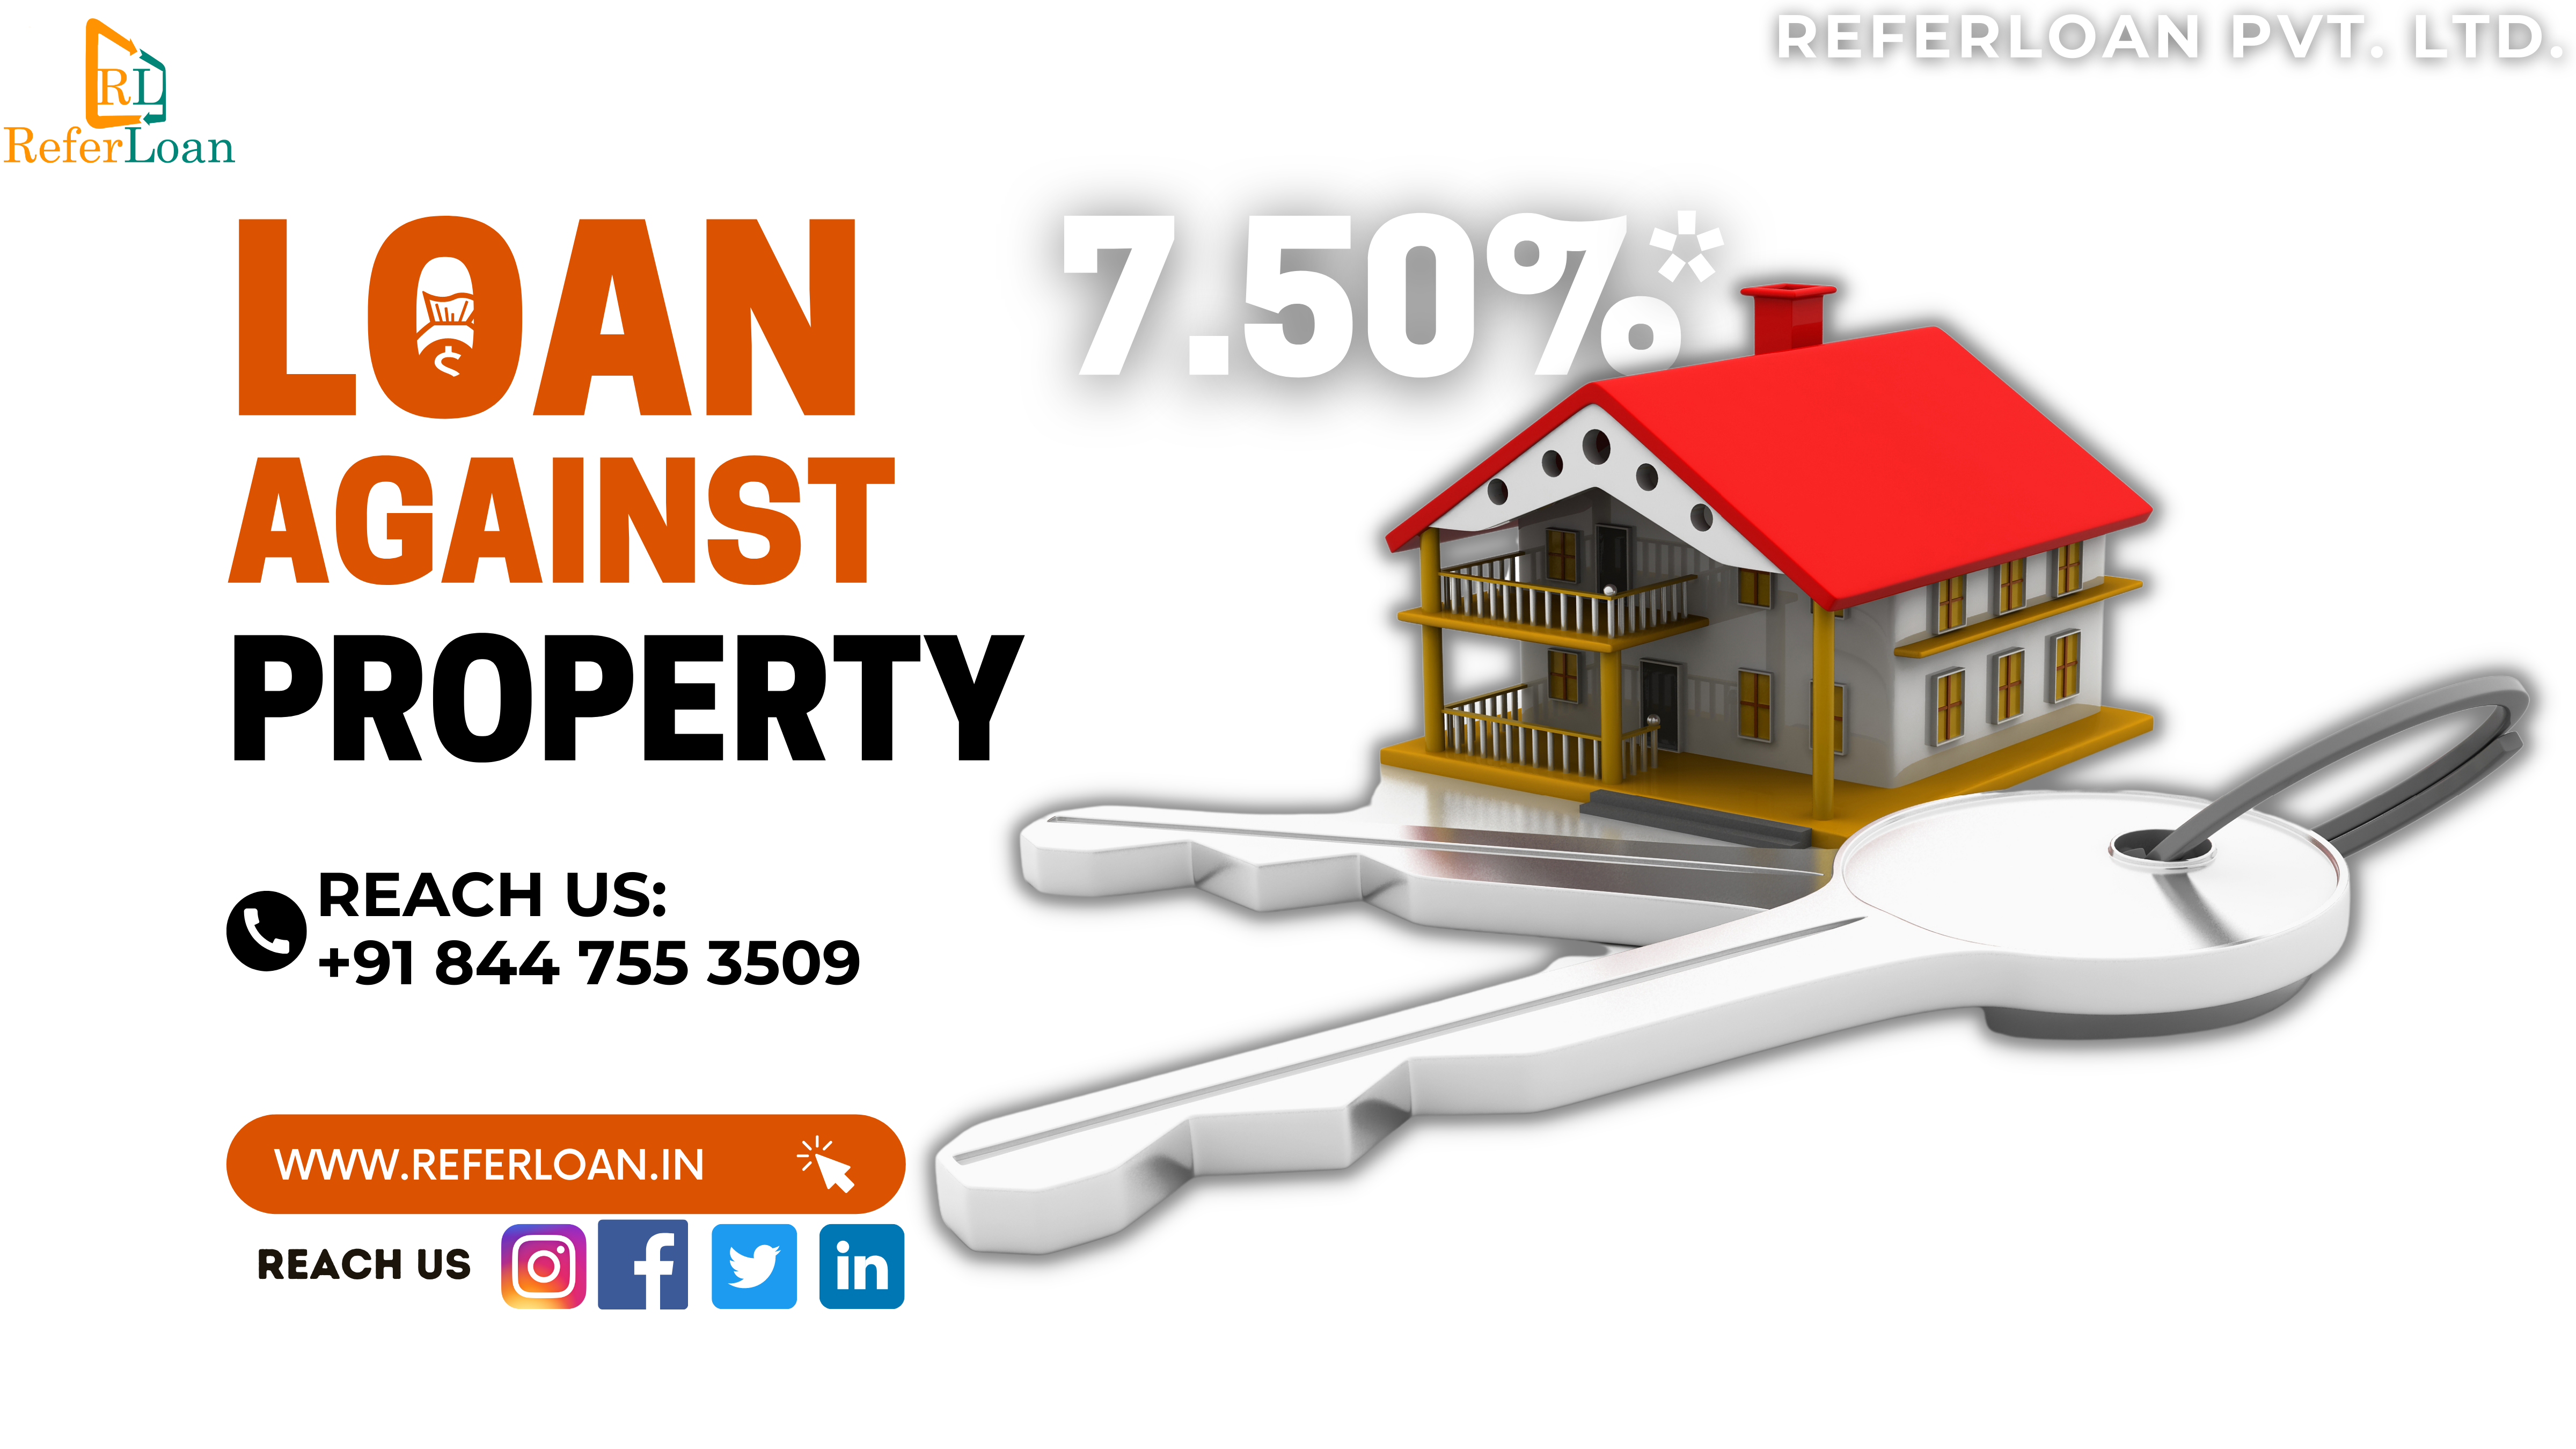 Loan Against Property with Referloan